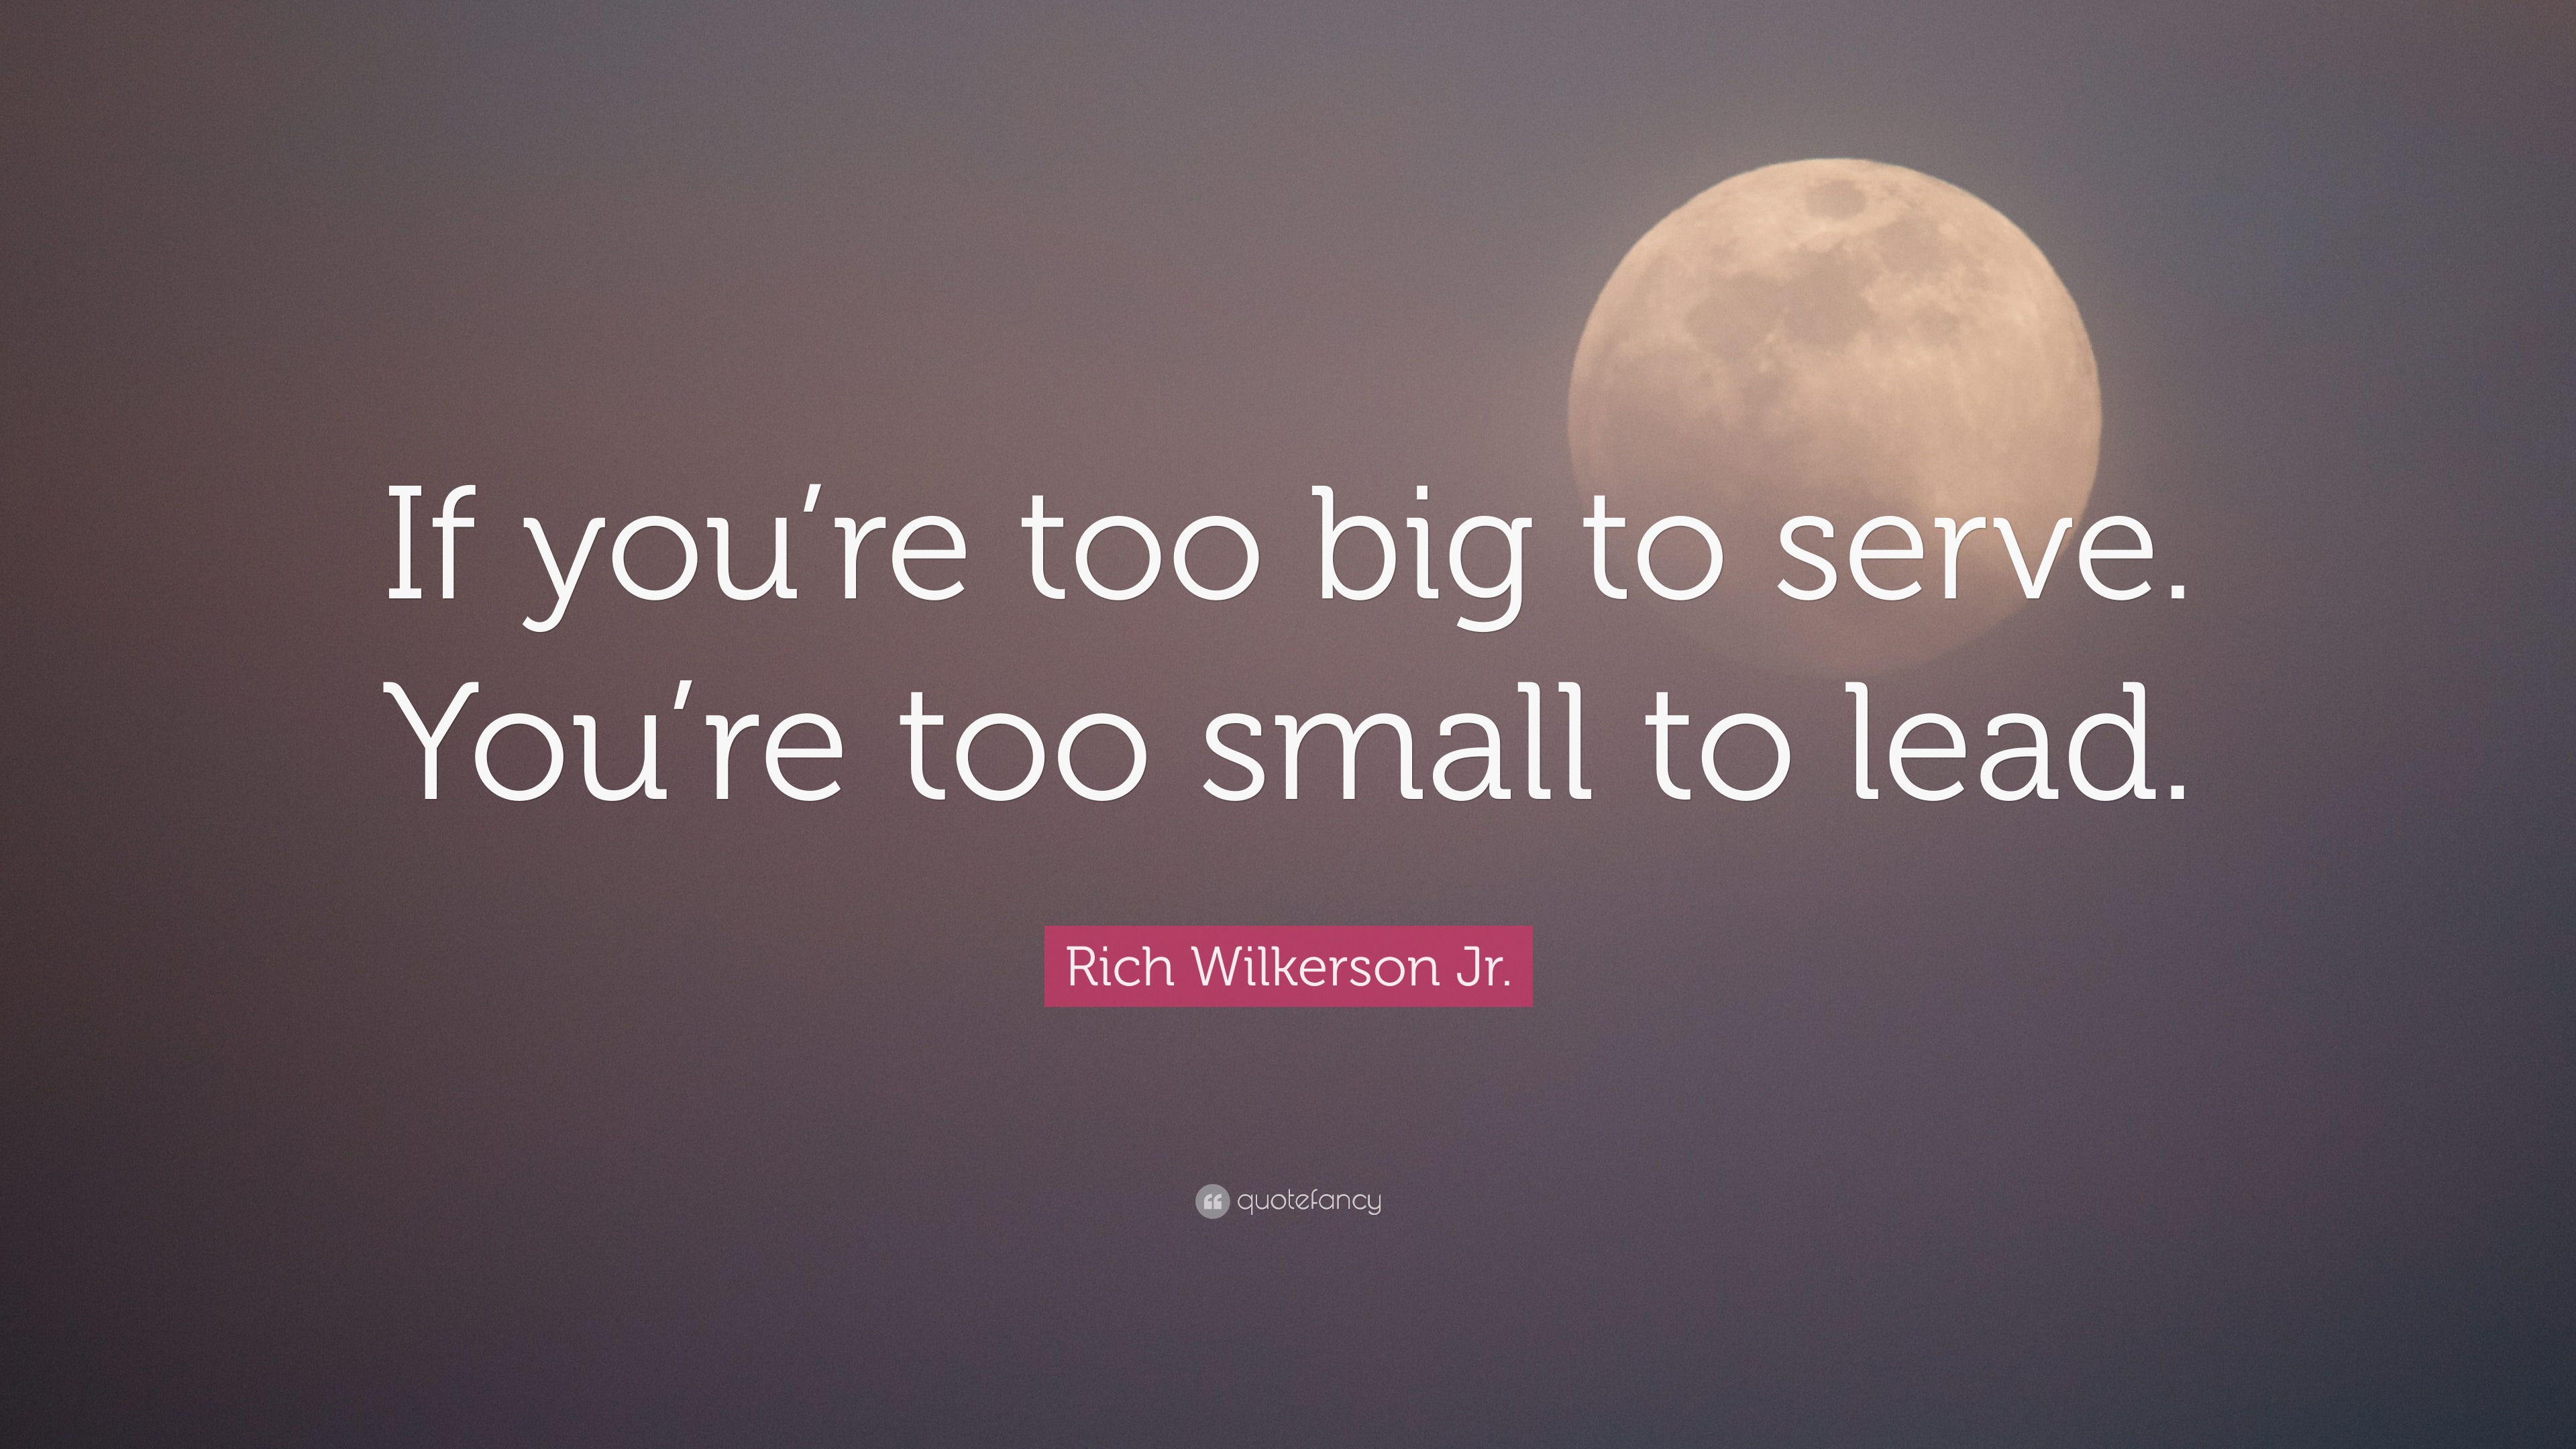 Rich Wilkerson Jr. Quote: “If you're too big to serve. You're too small to